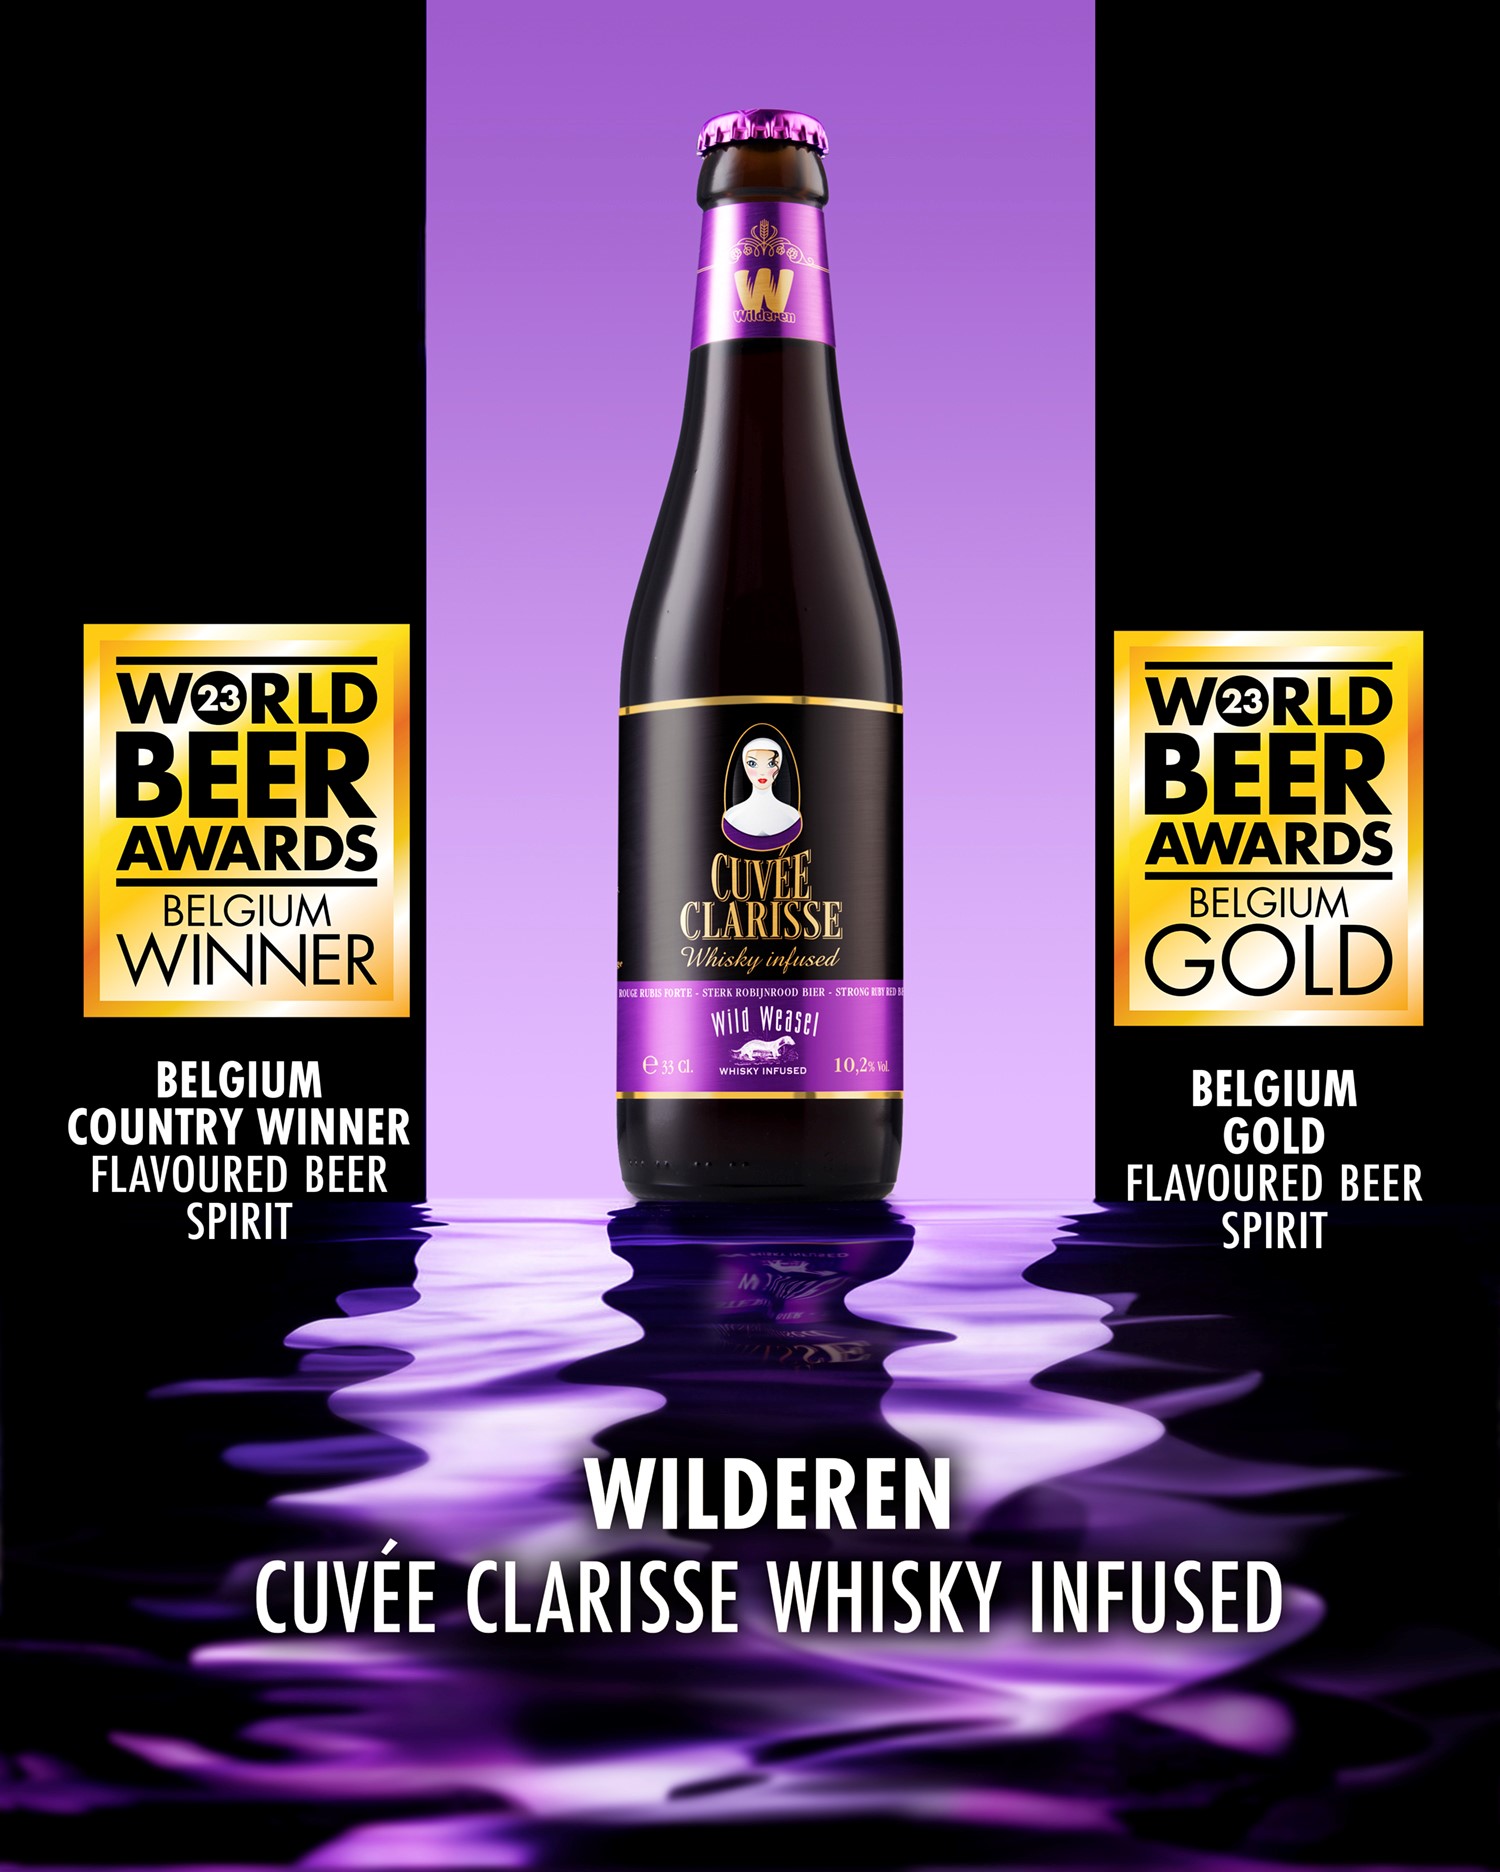 Cuvee Clarisse Whisky Infused